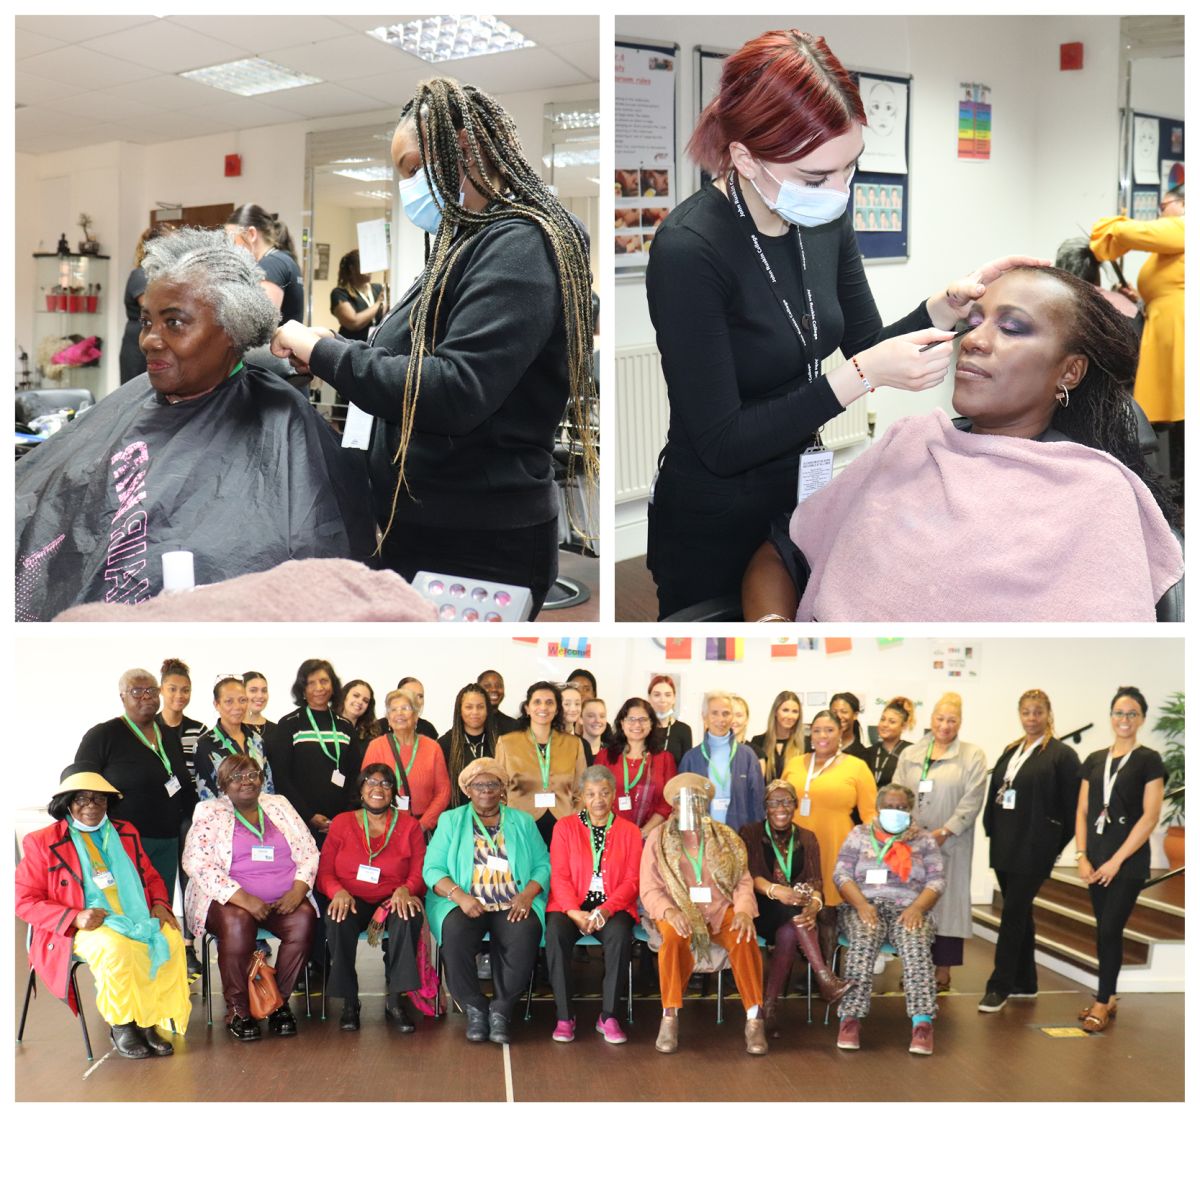 Members of the Croydon community were treated to a day of pampering courtesy of John Ruskin College Hair & Beauty students! 